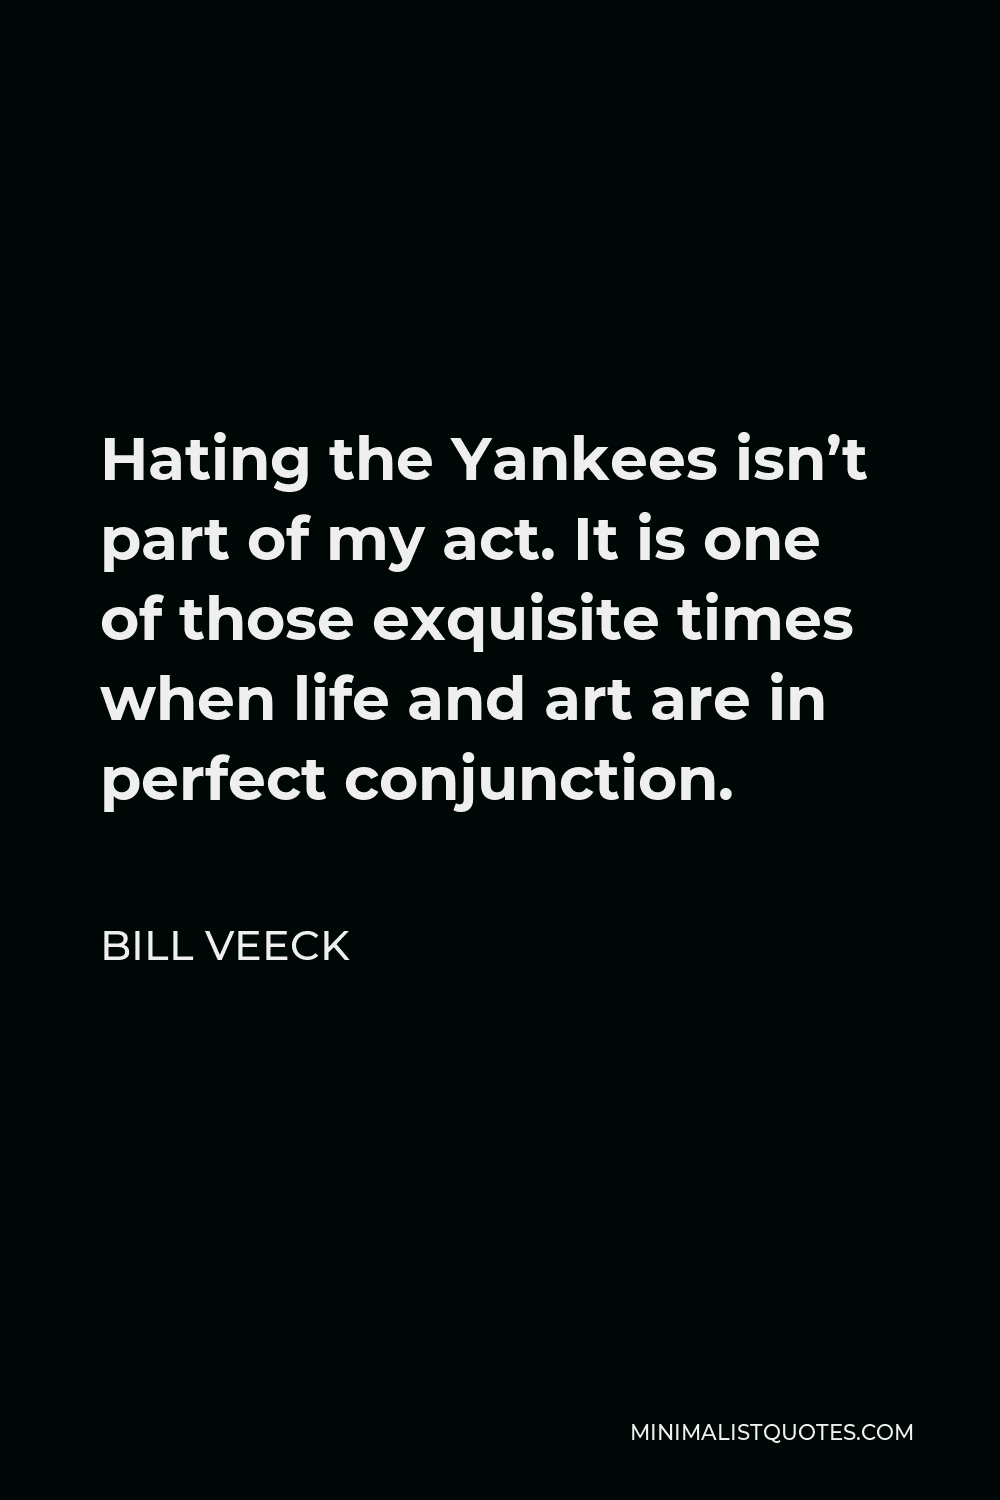 Bill Veeck Quote - Hating the Yankees isn’t part of my act. It is one of those exquisite times when life and art are in perfect conjunction.